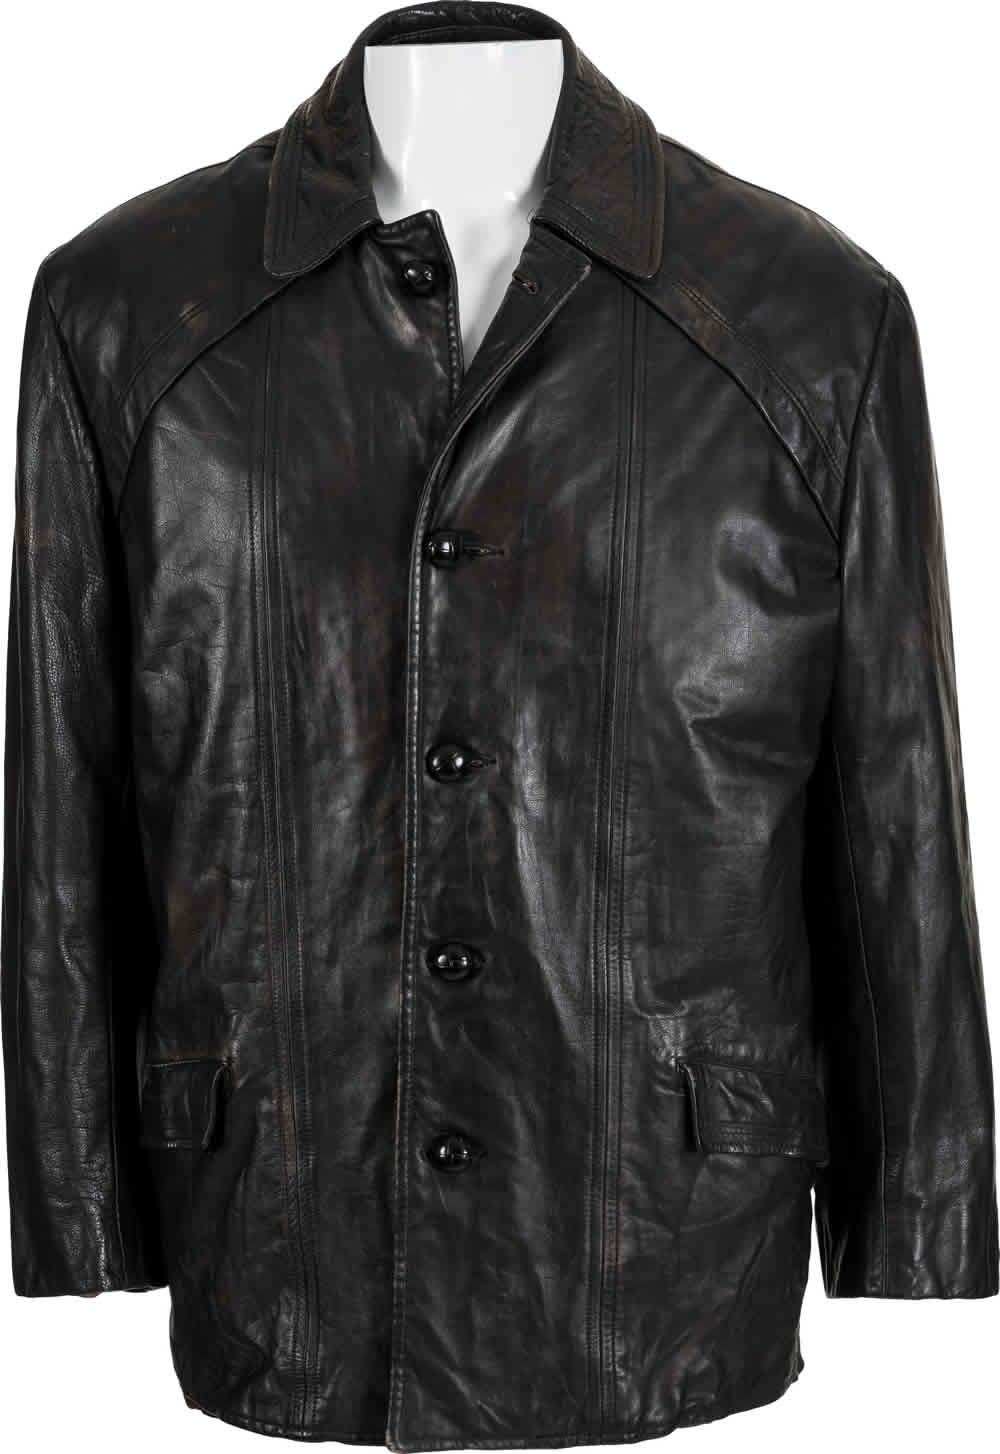 Sylvester Stallone's Personal Black Leather Jacket from Rocky